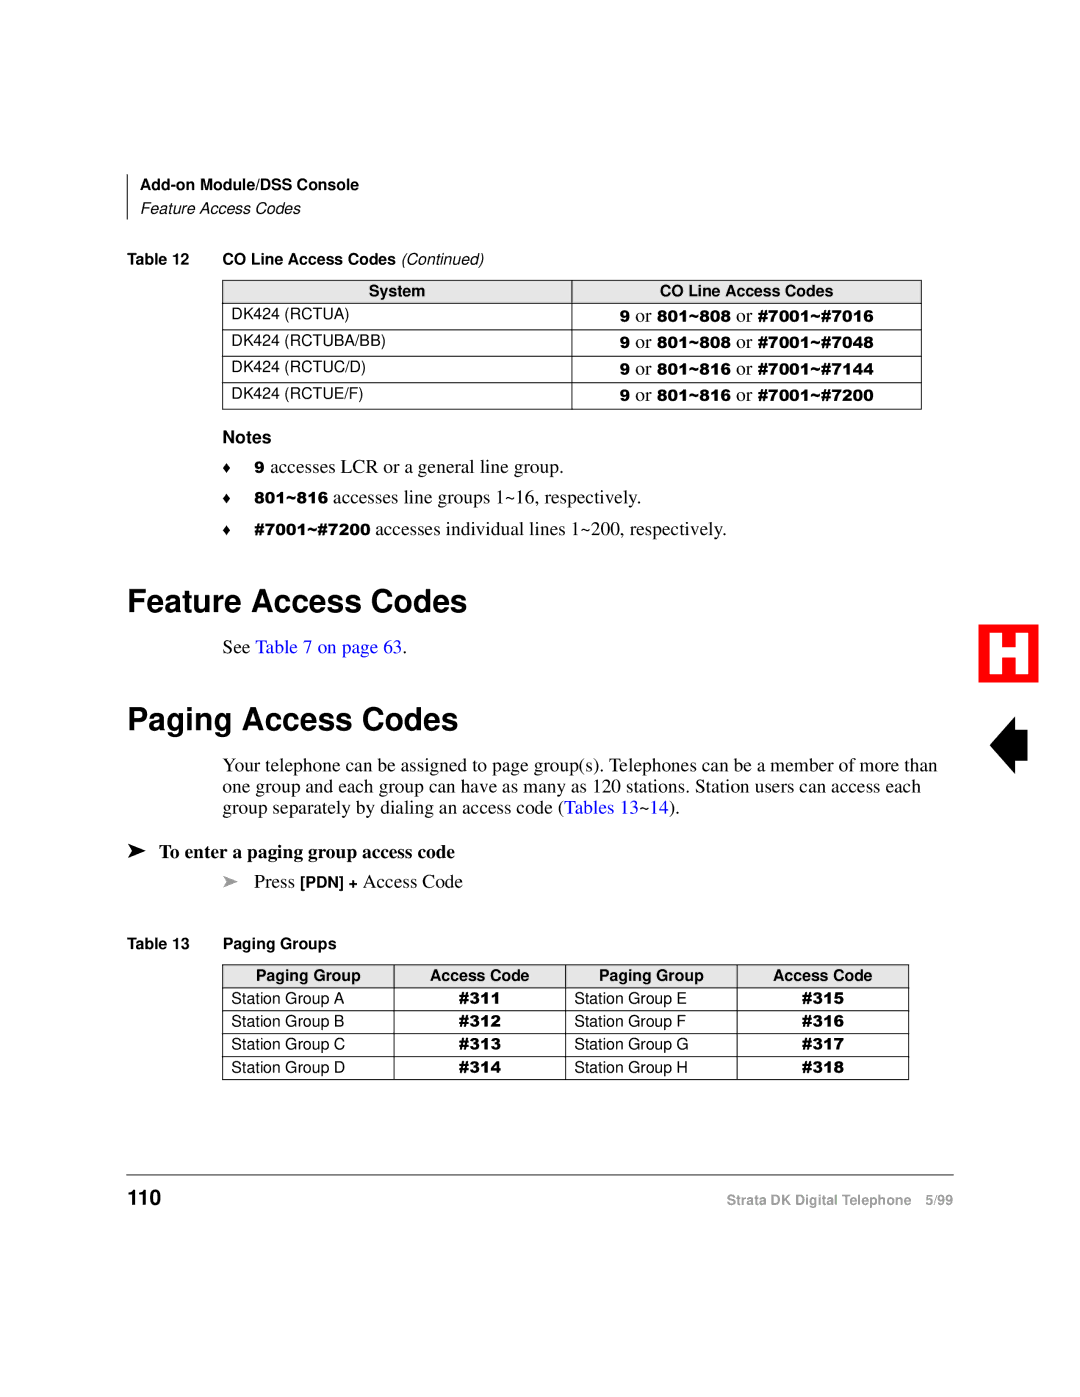 Toshiba Digital Telephone manual Feature Access Codes, Paging Access Codes, To enter a paging group access code 